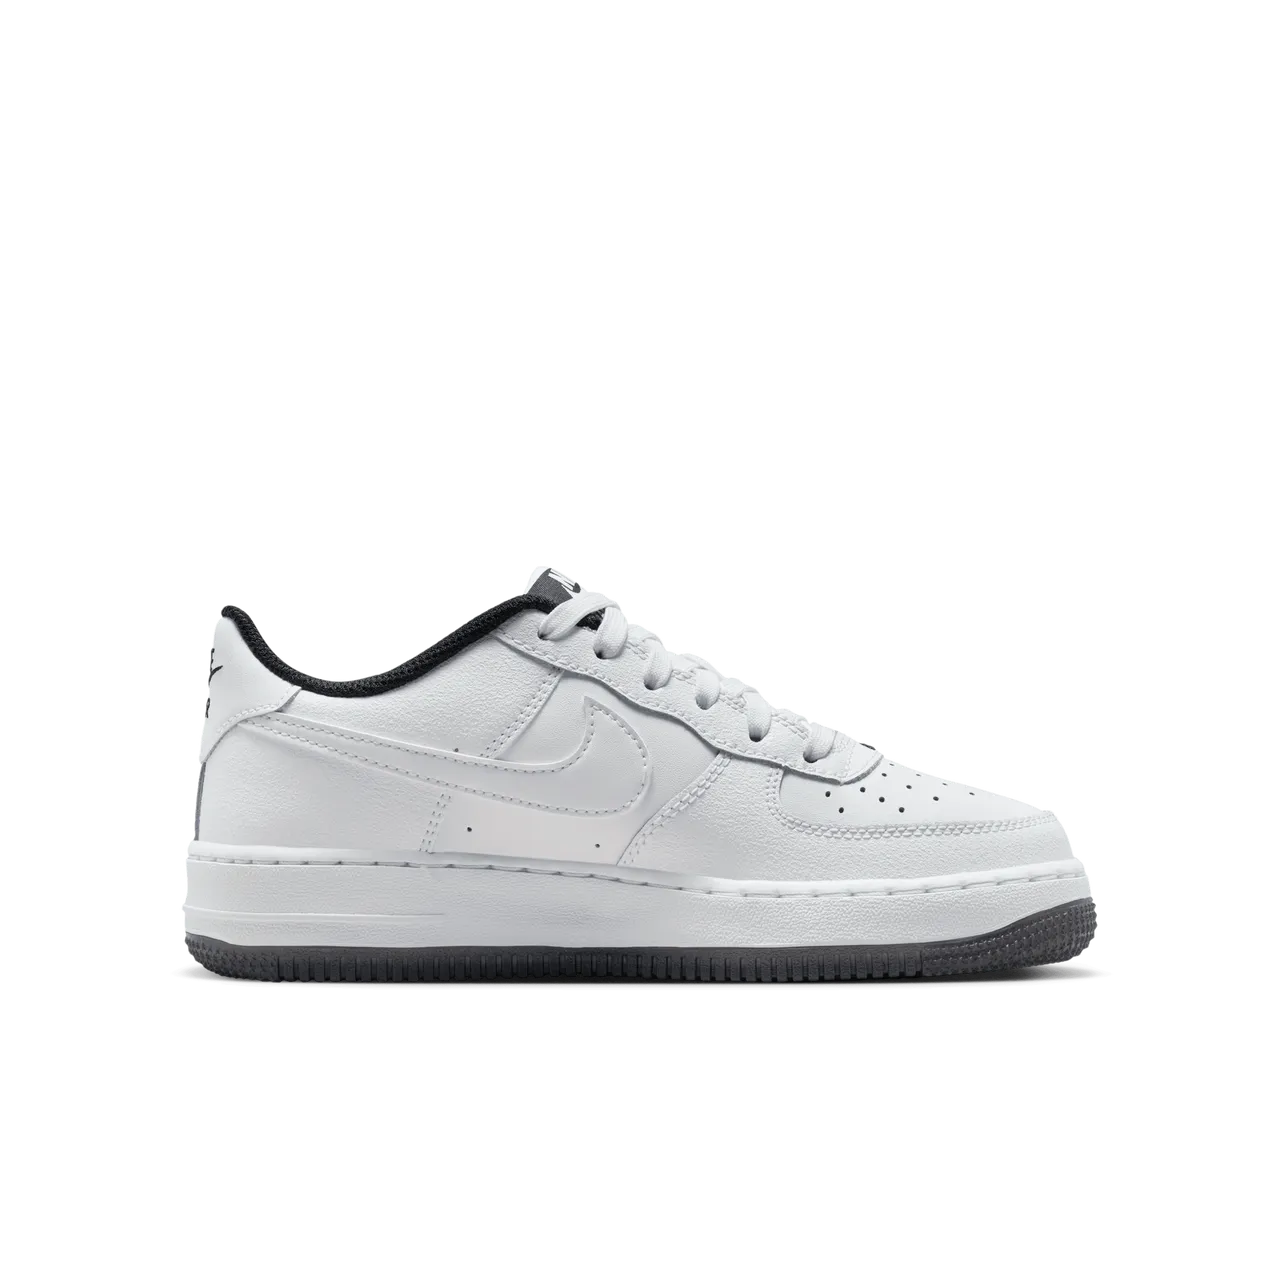 Nike Air Force 1 LV8 4 Older Kids' Shoes - White